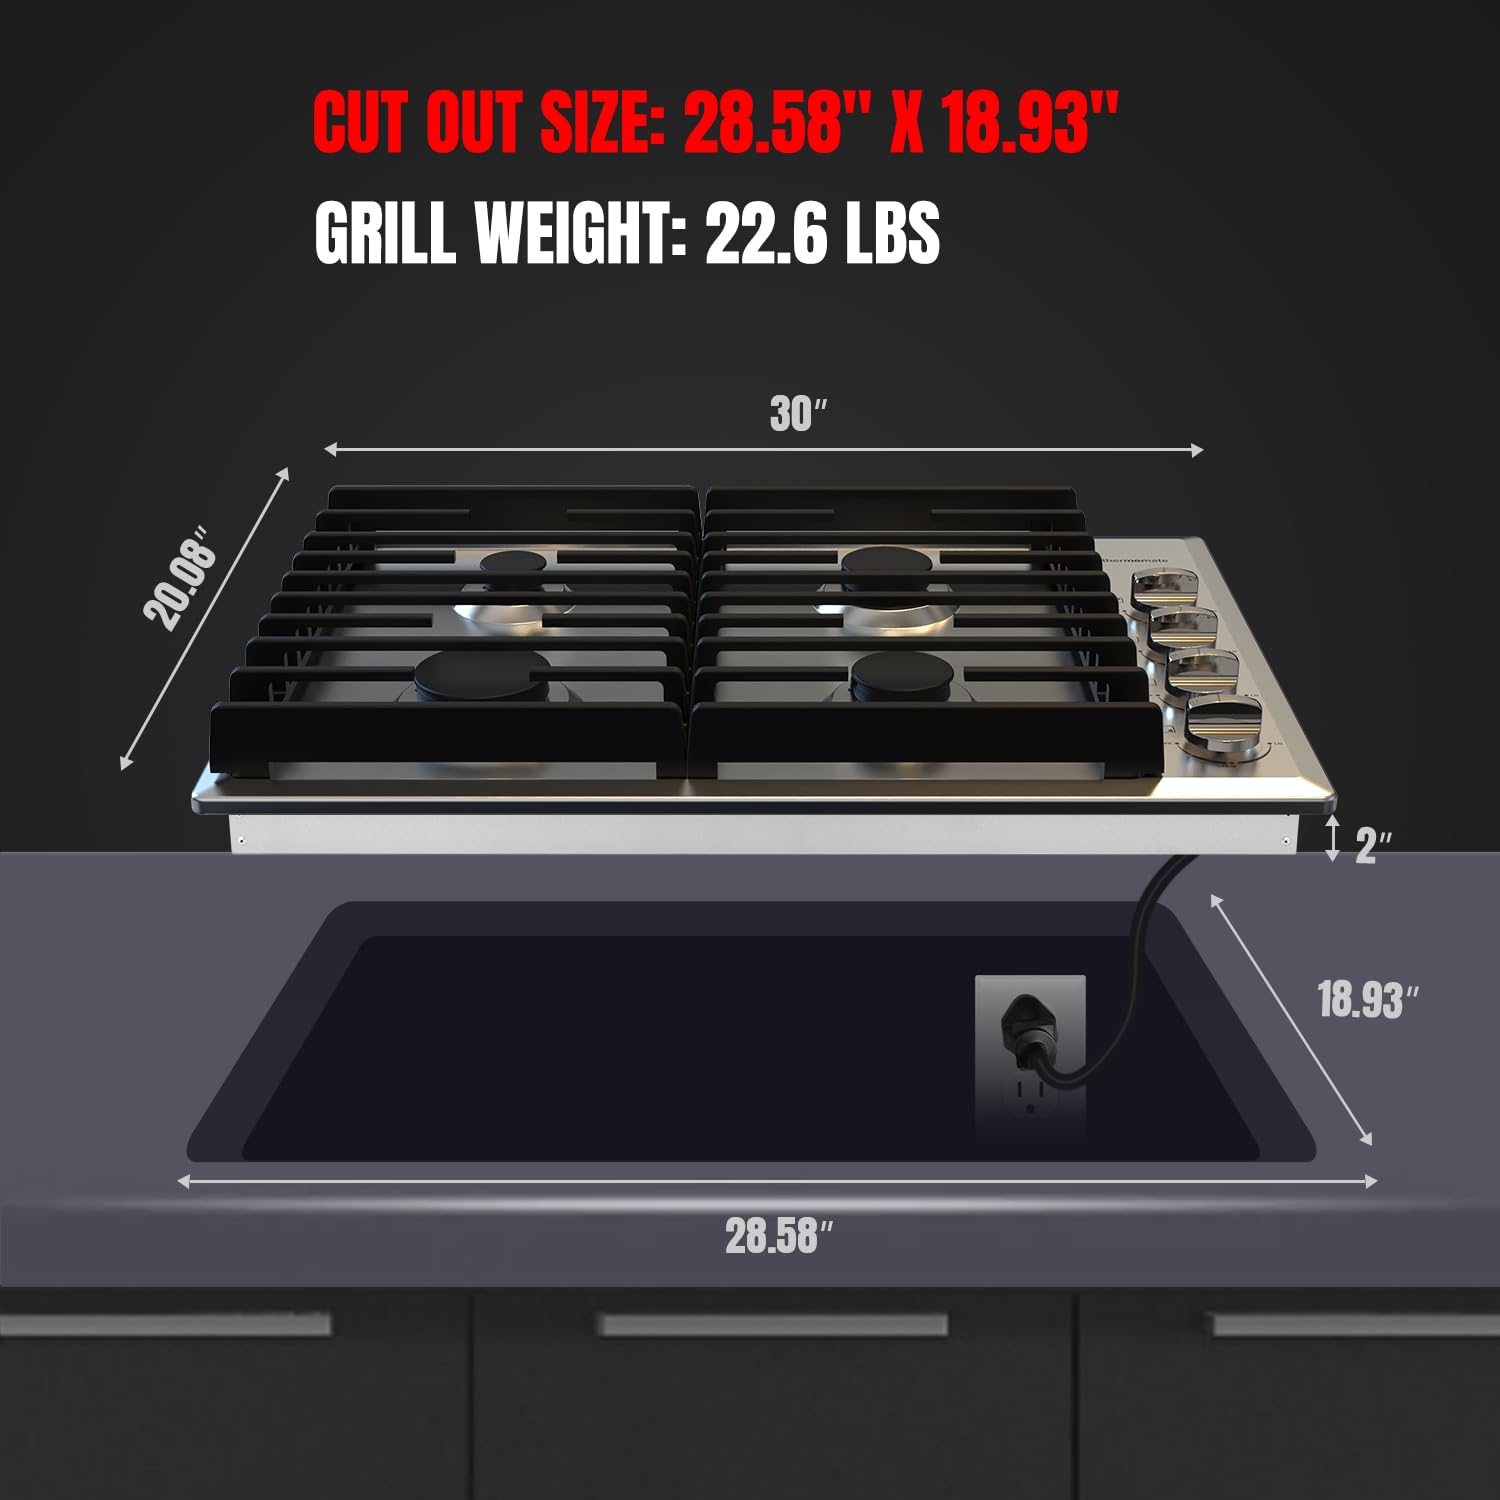 CUT OUT SIZE: 28.58" X 18.93" GRILL WEIGHT: 22.6 LBS